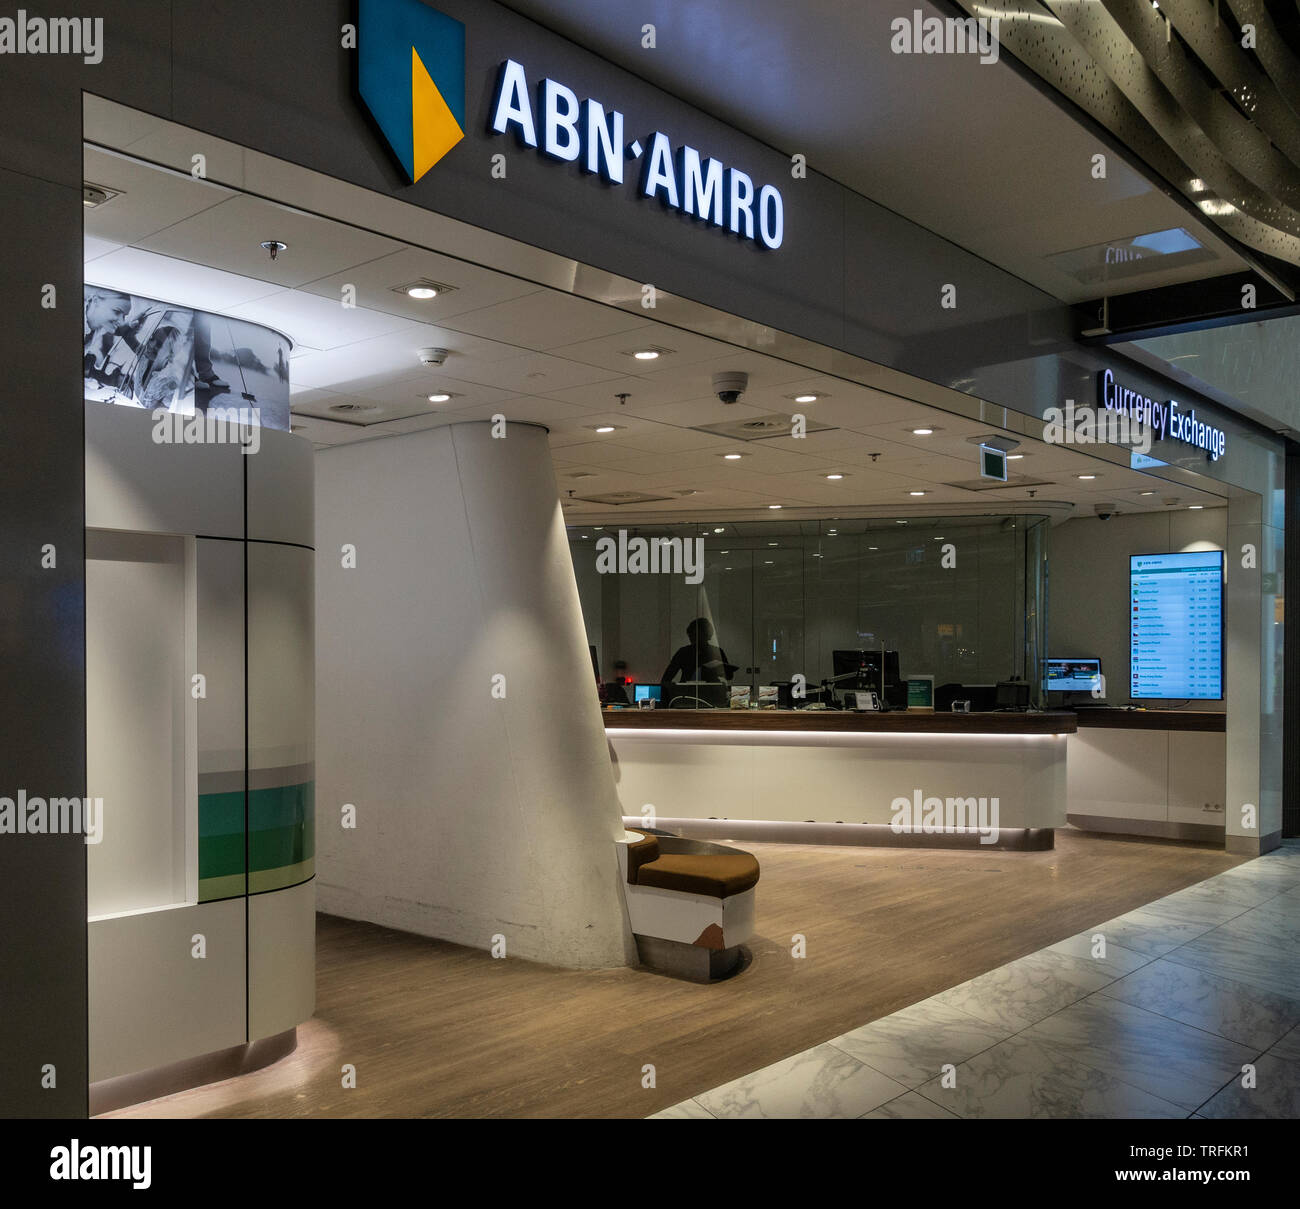 ABN Amro currency exchange desk at Schiphol Airport, Amsterdam Stock Photo